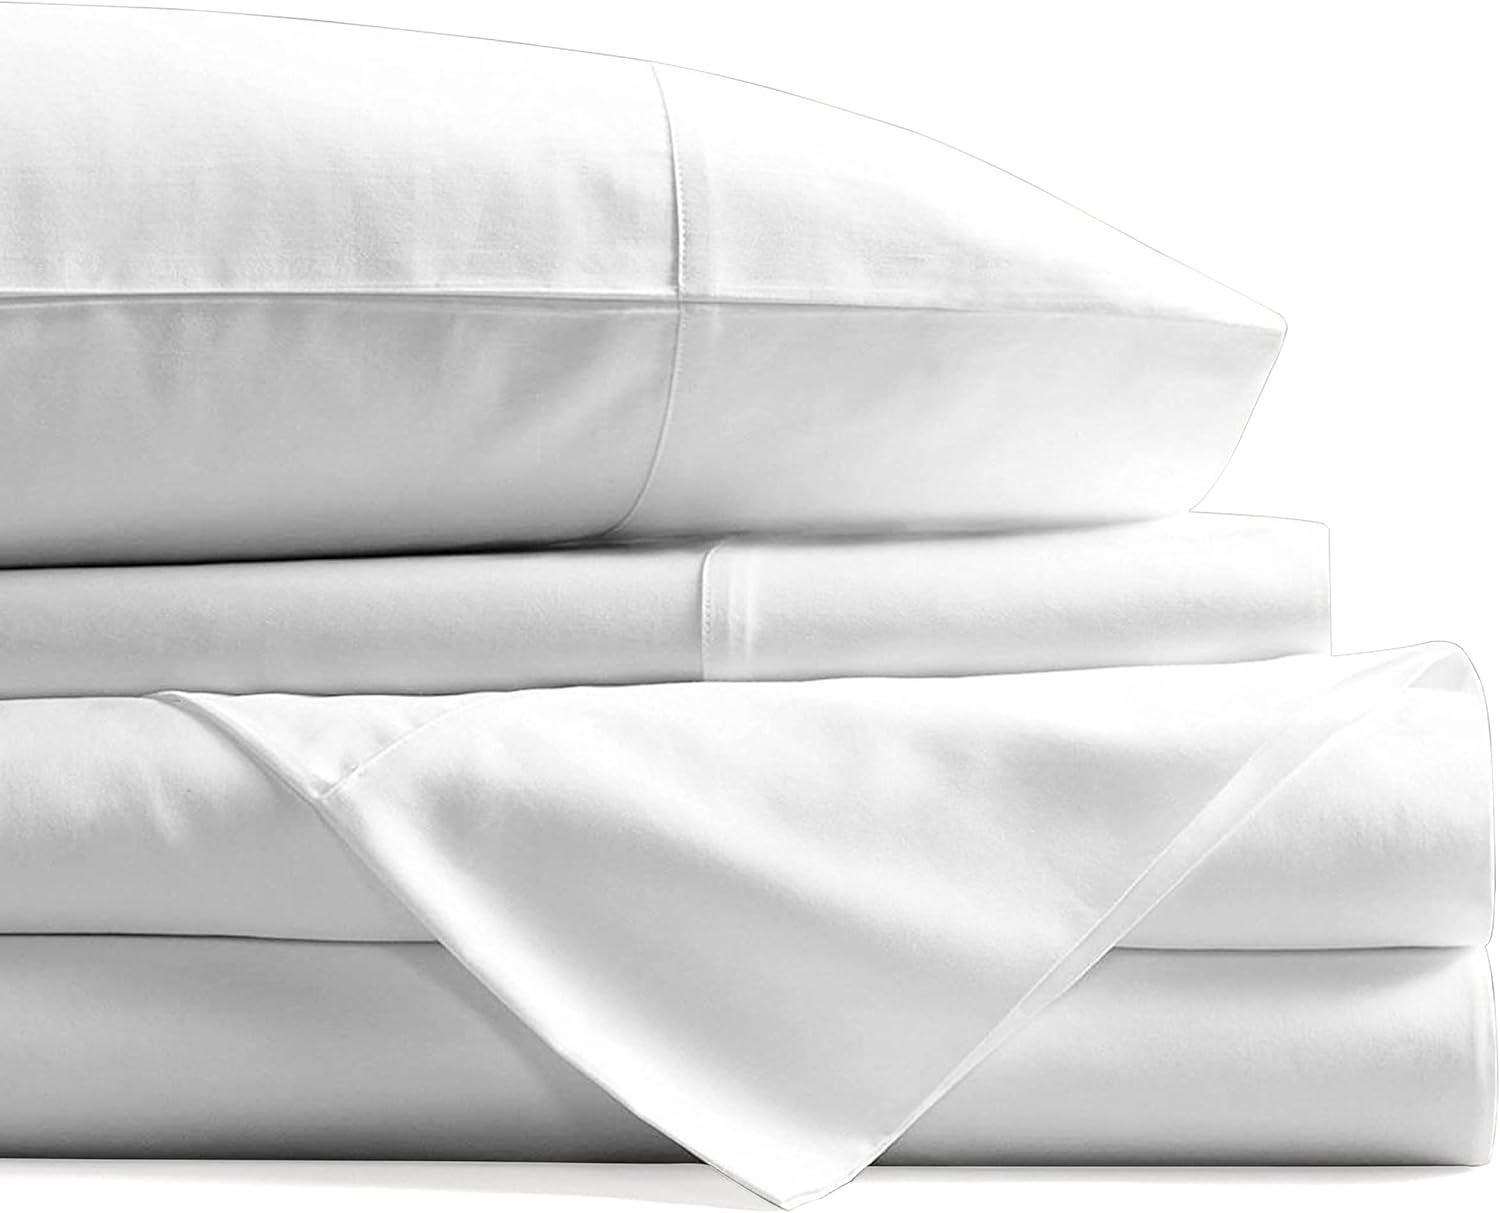 Details about   Extra Deep Pkt Bedding Items 1000 Thread Count Egyptian Cotton Burgundy Stripe* 